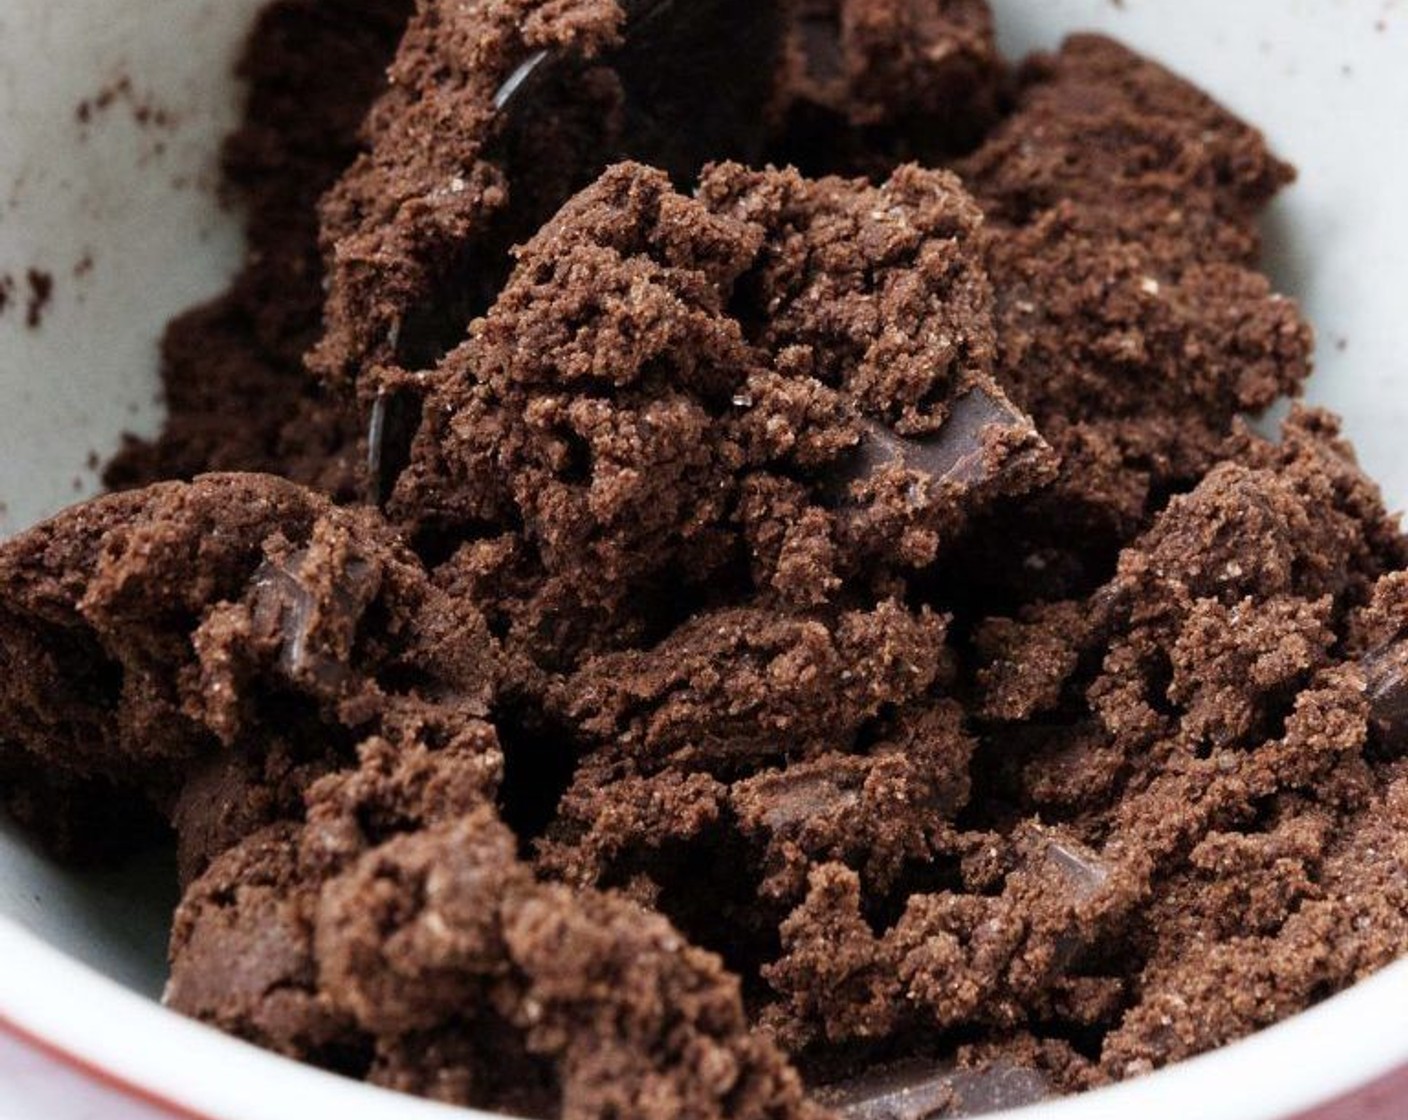 step 4 In a separate bowl, stir Spelt Flour (1 cup), Cacao Powder (1/3 cup), Coconut Sugar (1/3 cup), Baking Powder (1/4 tsp) and Salt (1/4 tsp) together and pour in the wet ingredients. Add the Vegan Chocolate Chips (to taste) and mix to form the dough.